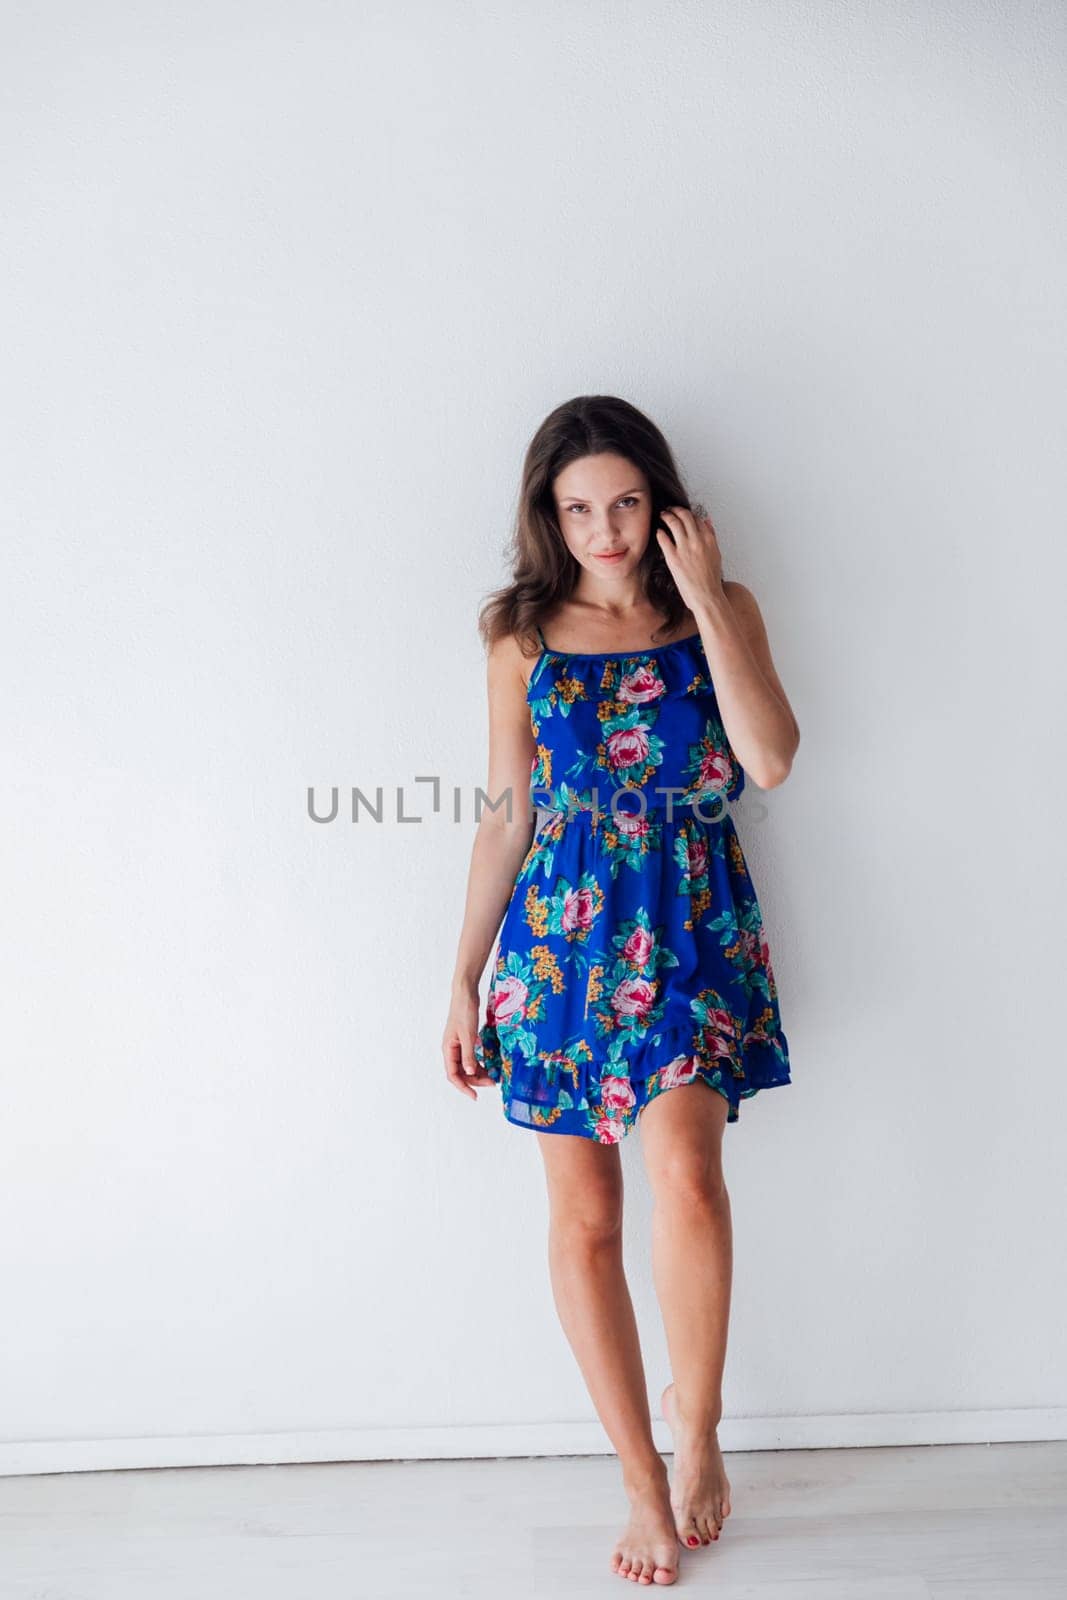 brunette woman in a blue floral dress against a white wall in a room